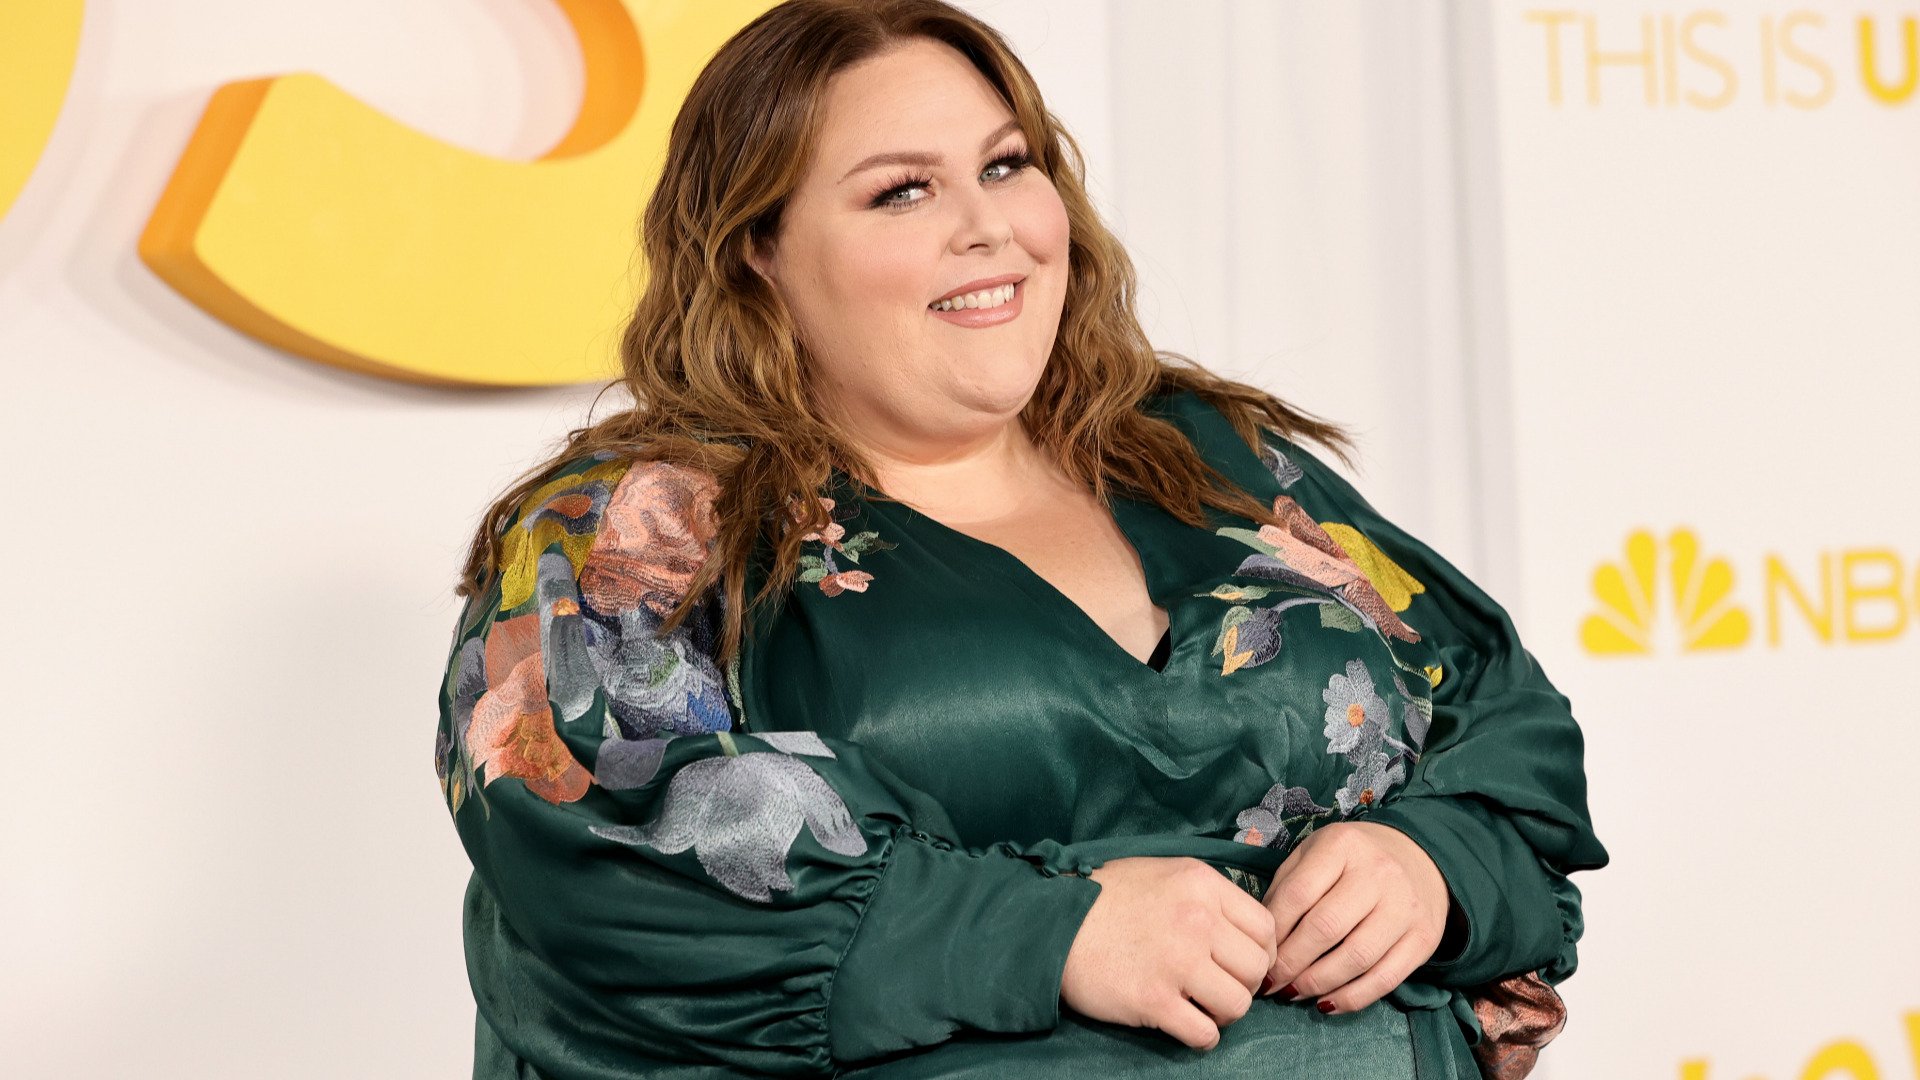 ‘This Is Us’ Season 6: Chrissy Metz Tells Fans to Watch the Last Chapter With an ‘Open Heart’